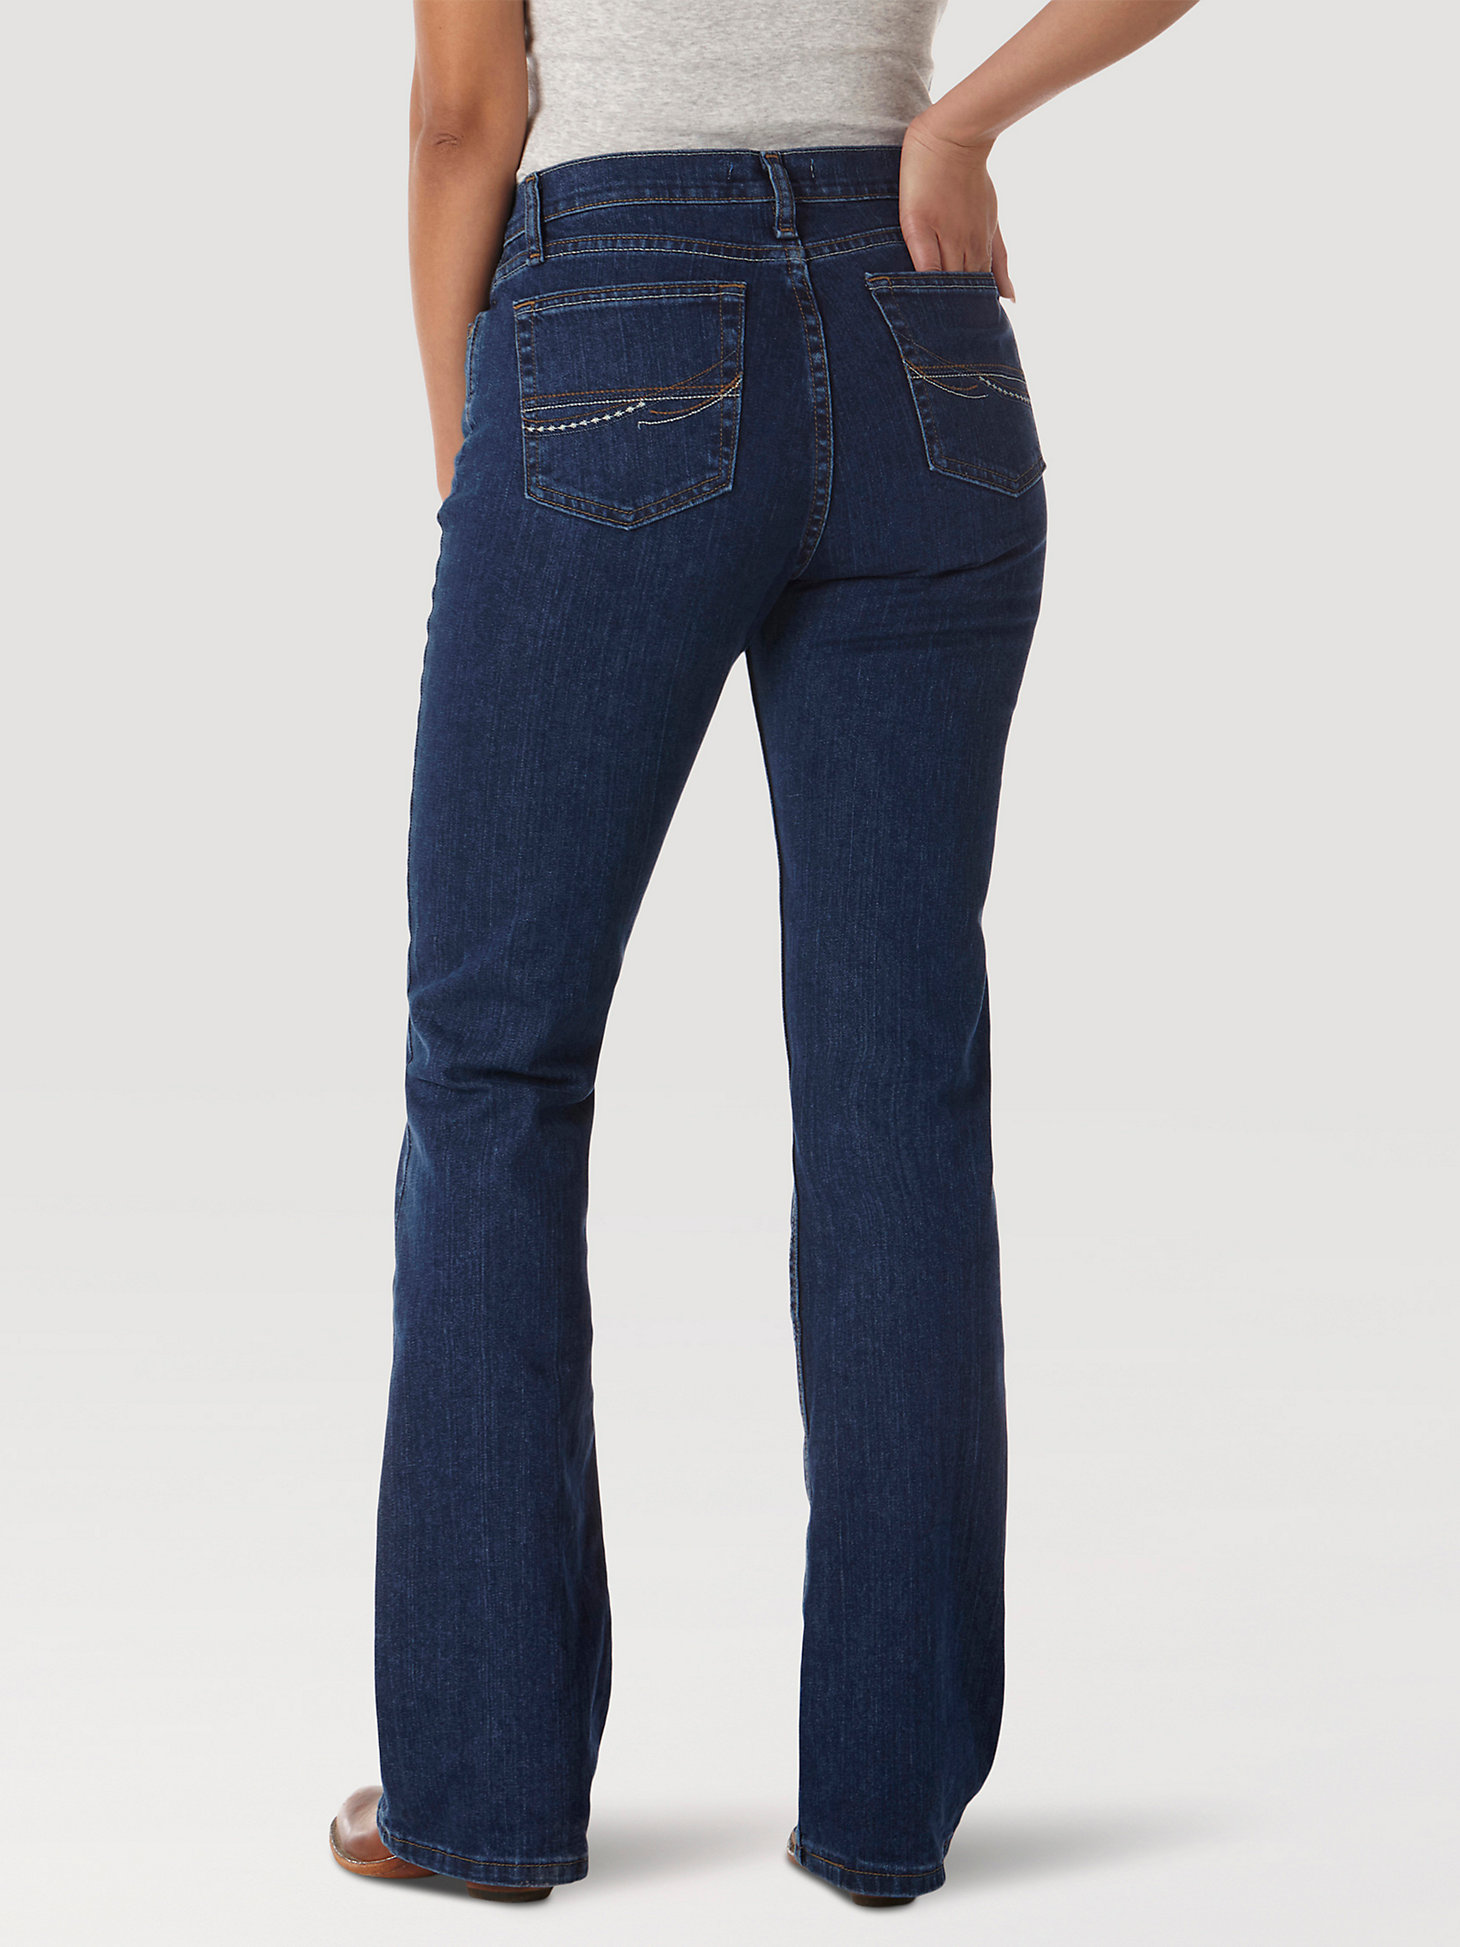 As Real As Wrangler Misses Classic Fit Bootcut Jean in CW Denim alternative view 2